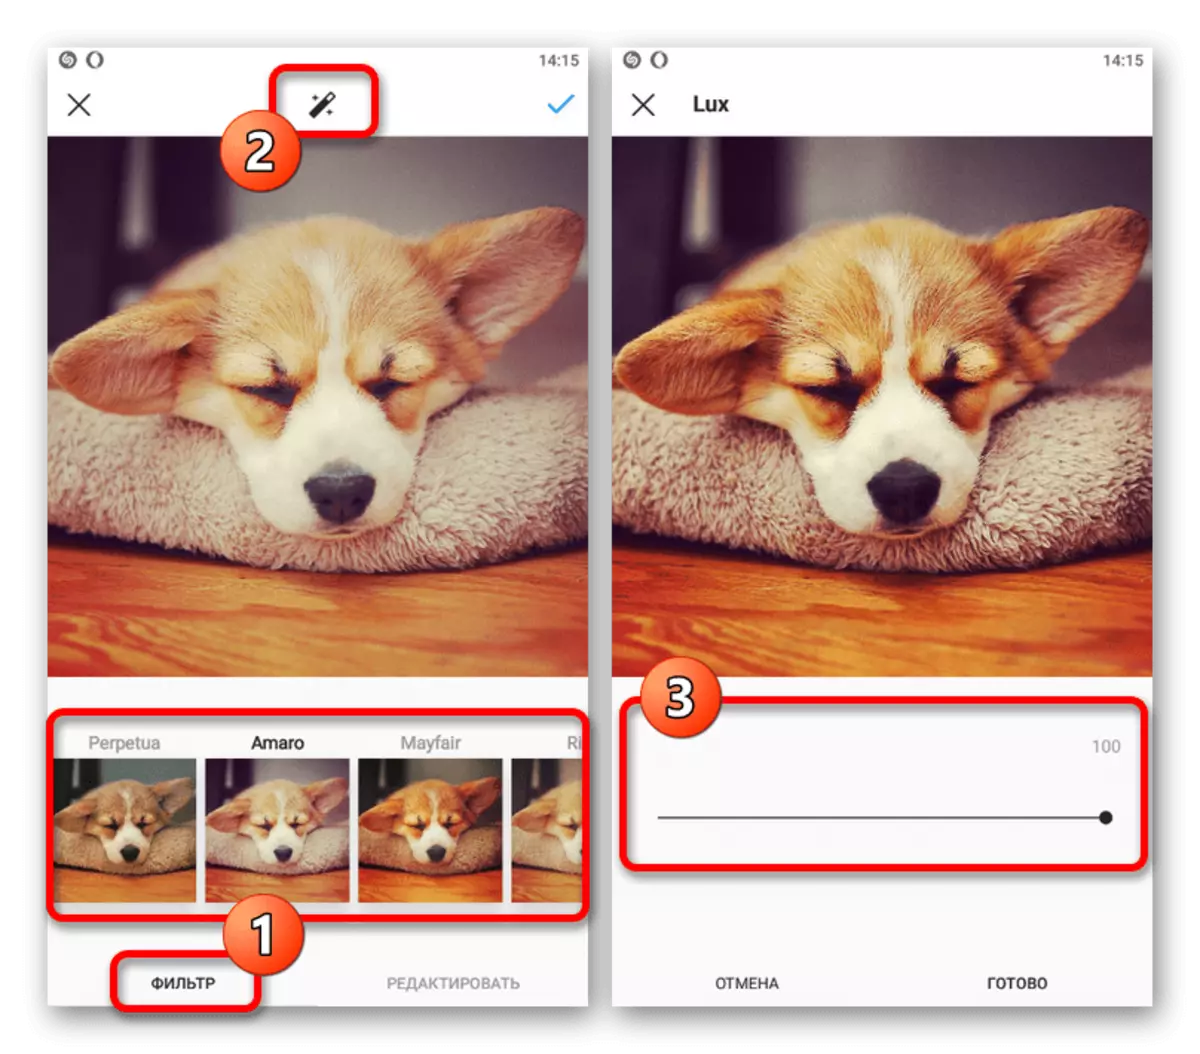 An example of configuring filters in the Instagram Mobile Application